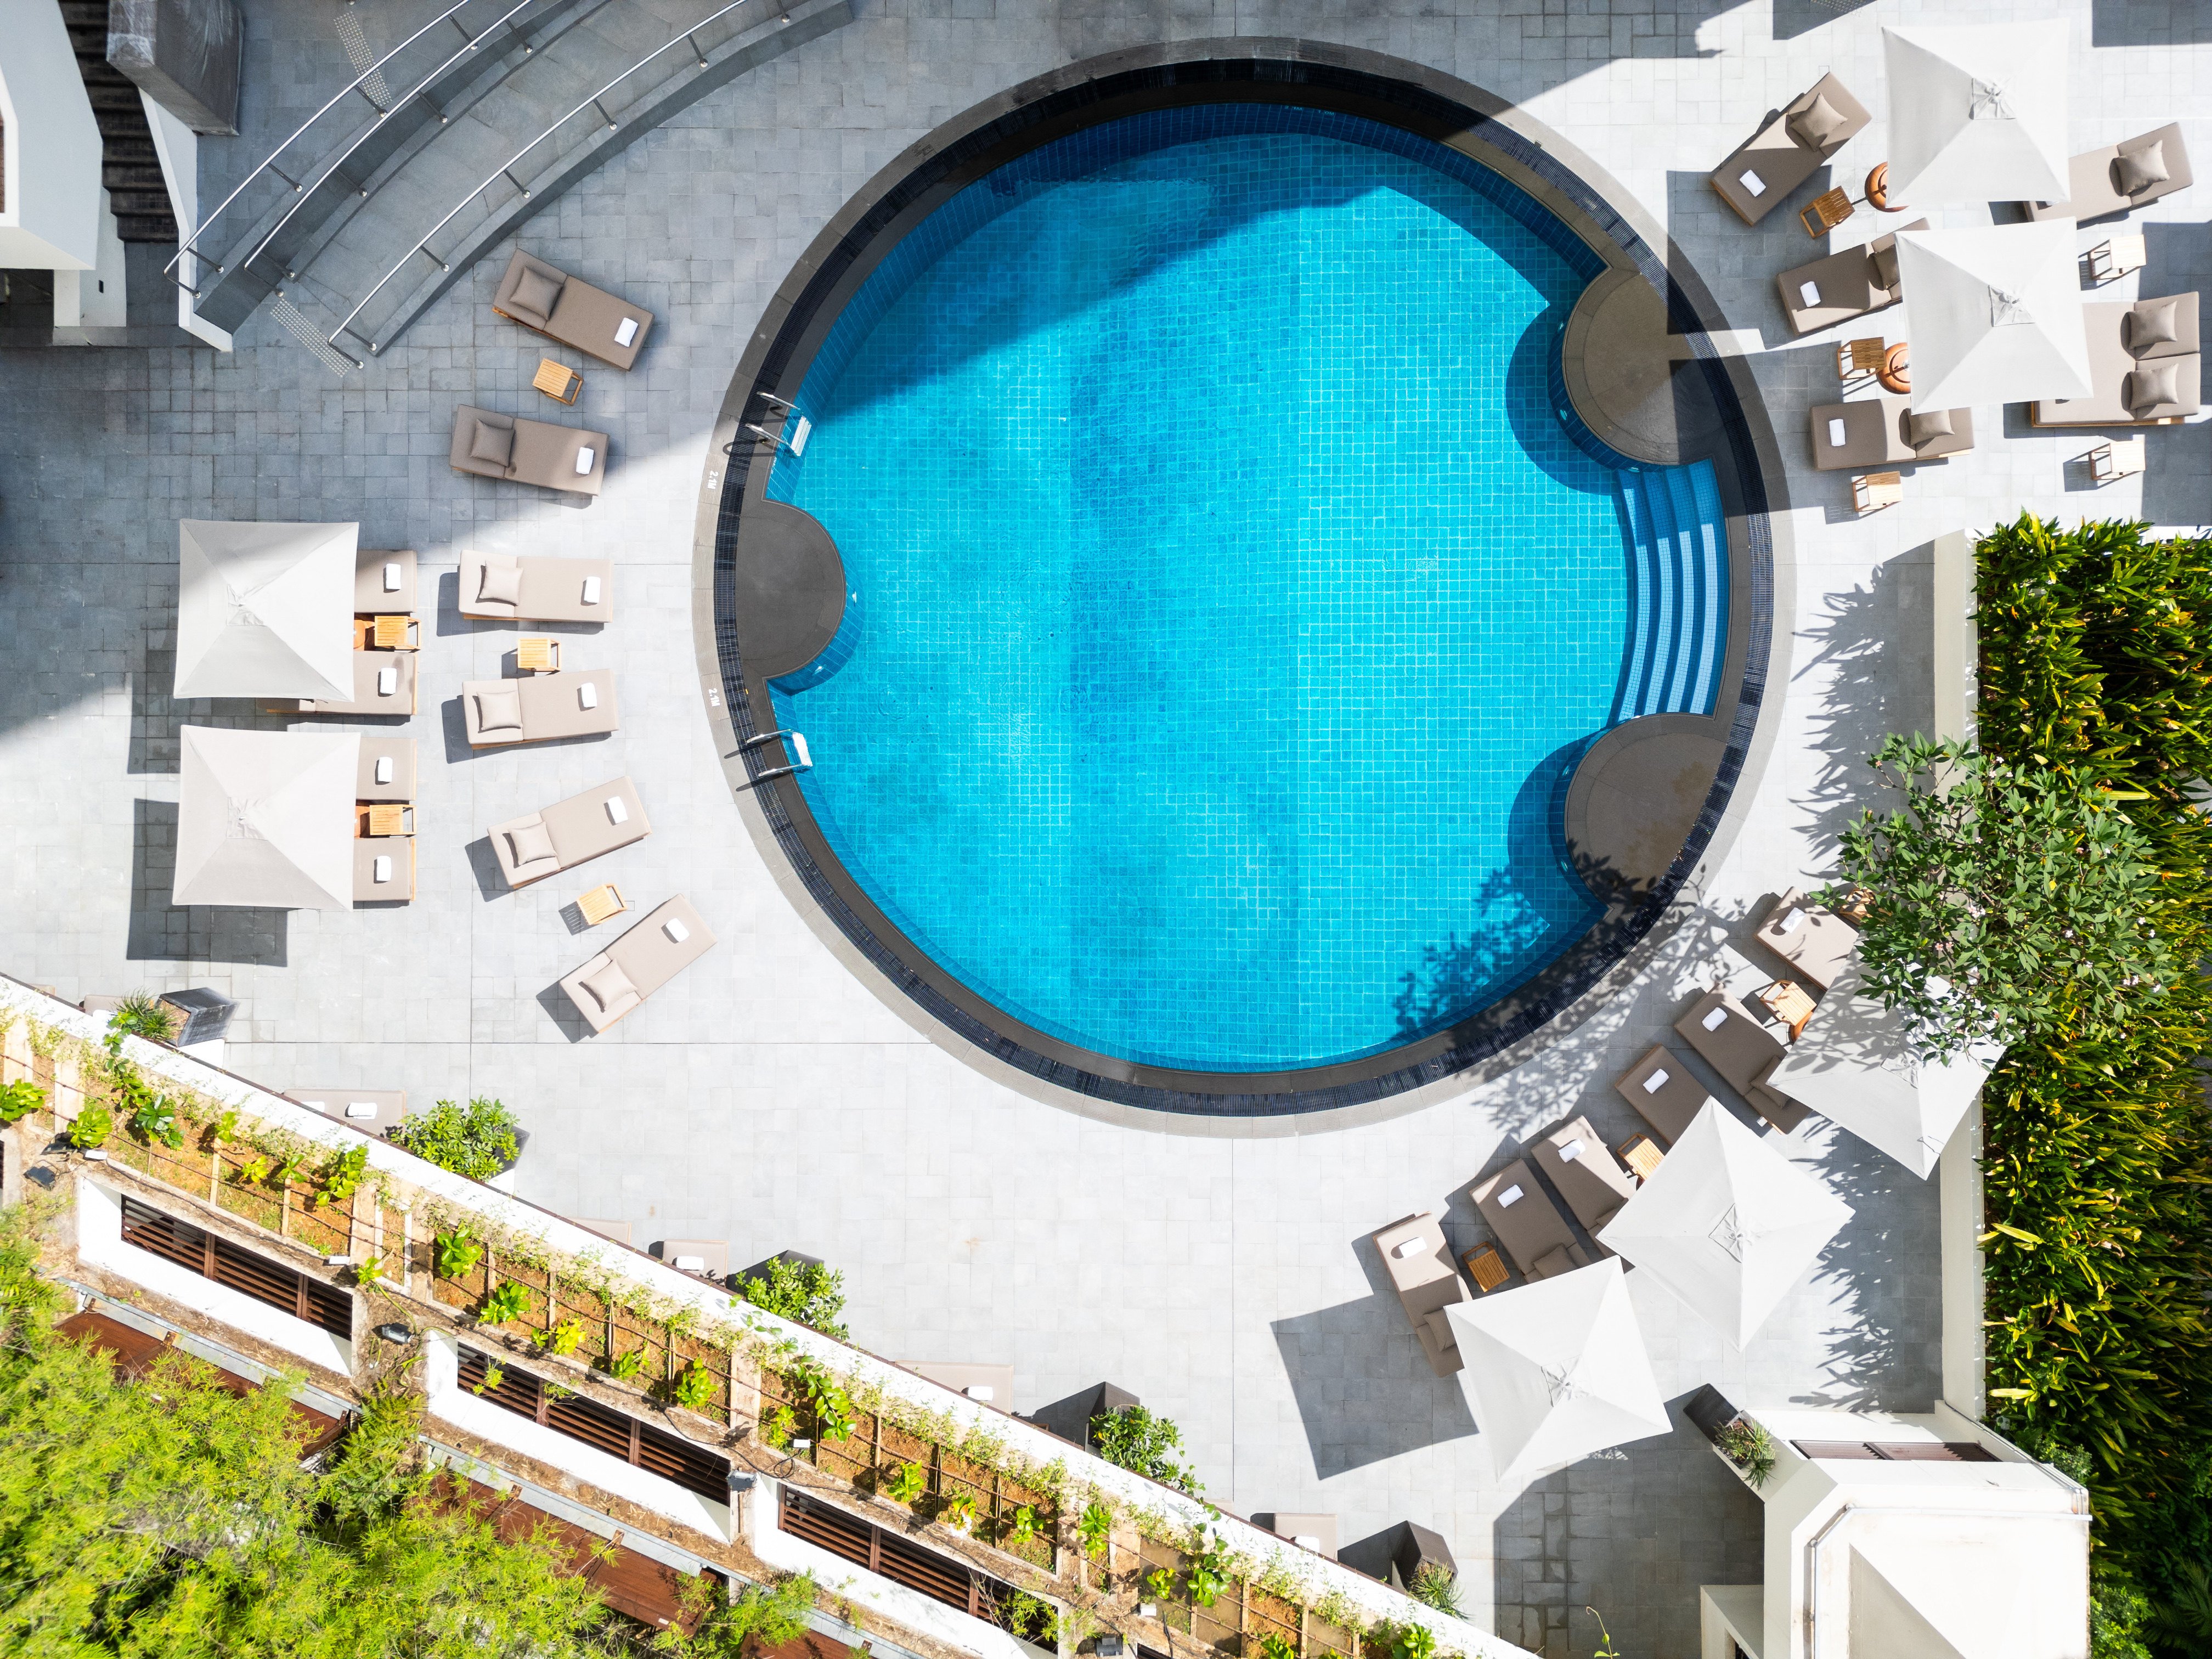 The outdoor pool at Conrad Singapore Orchard, formerly the Regent Singapore. Photos: Handout